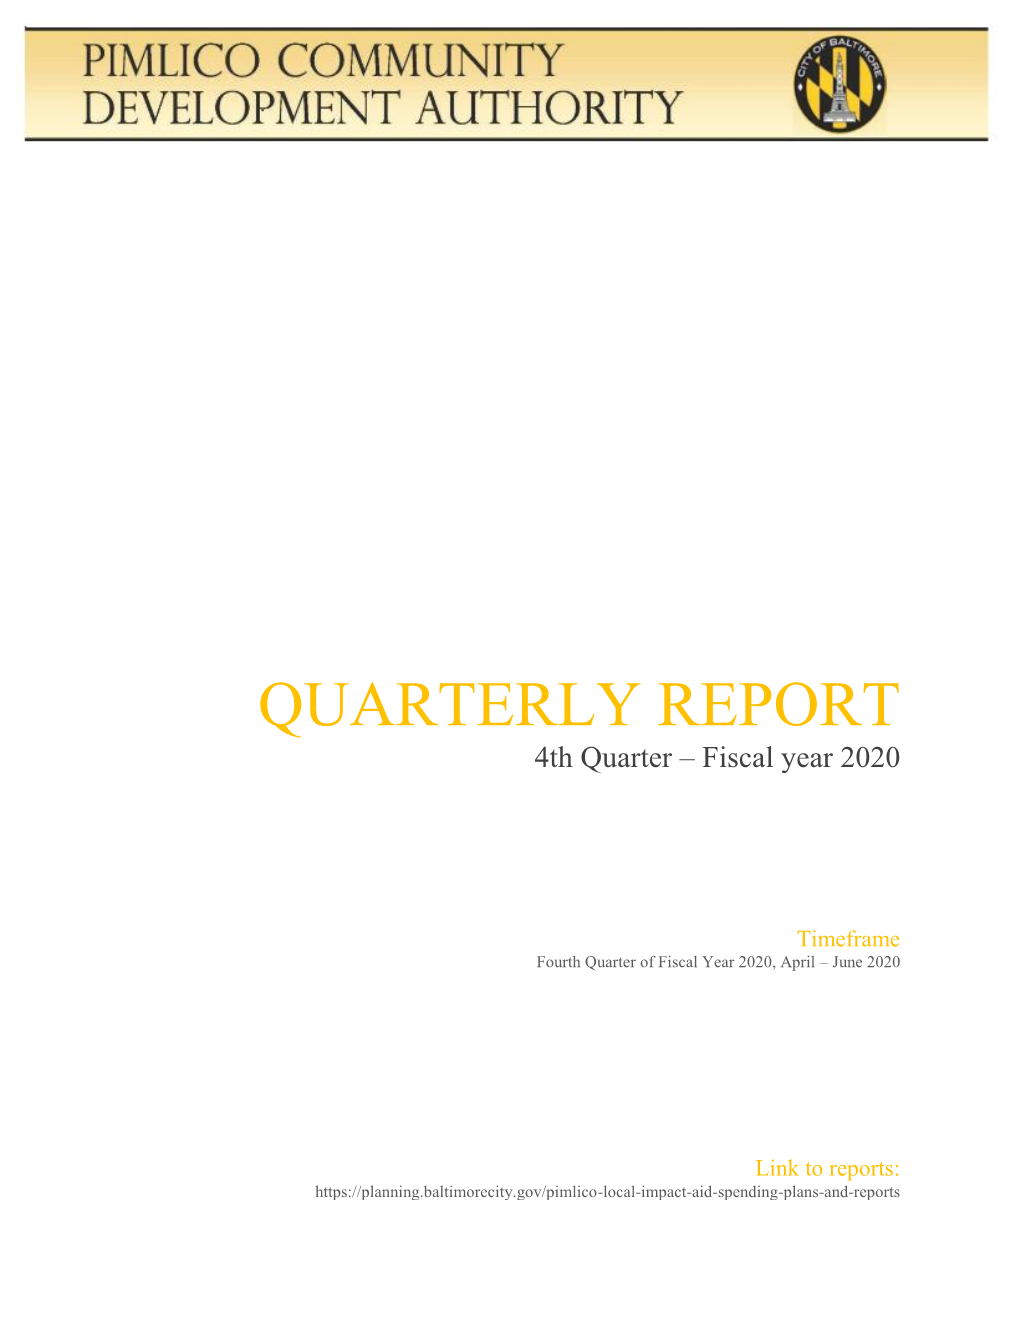 QUARTERLY REPORT 4Th Quarter – Fiscal Year 2020